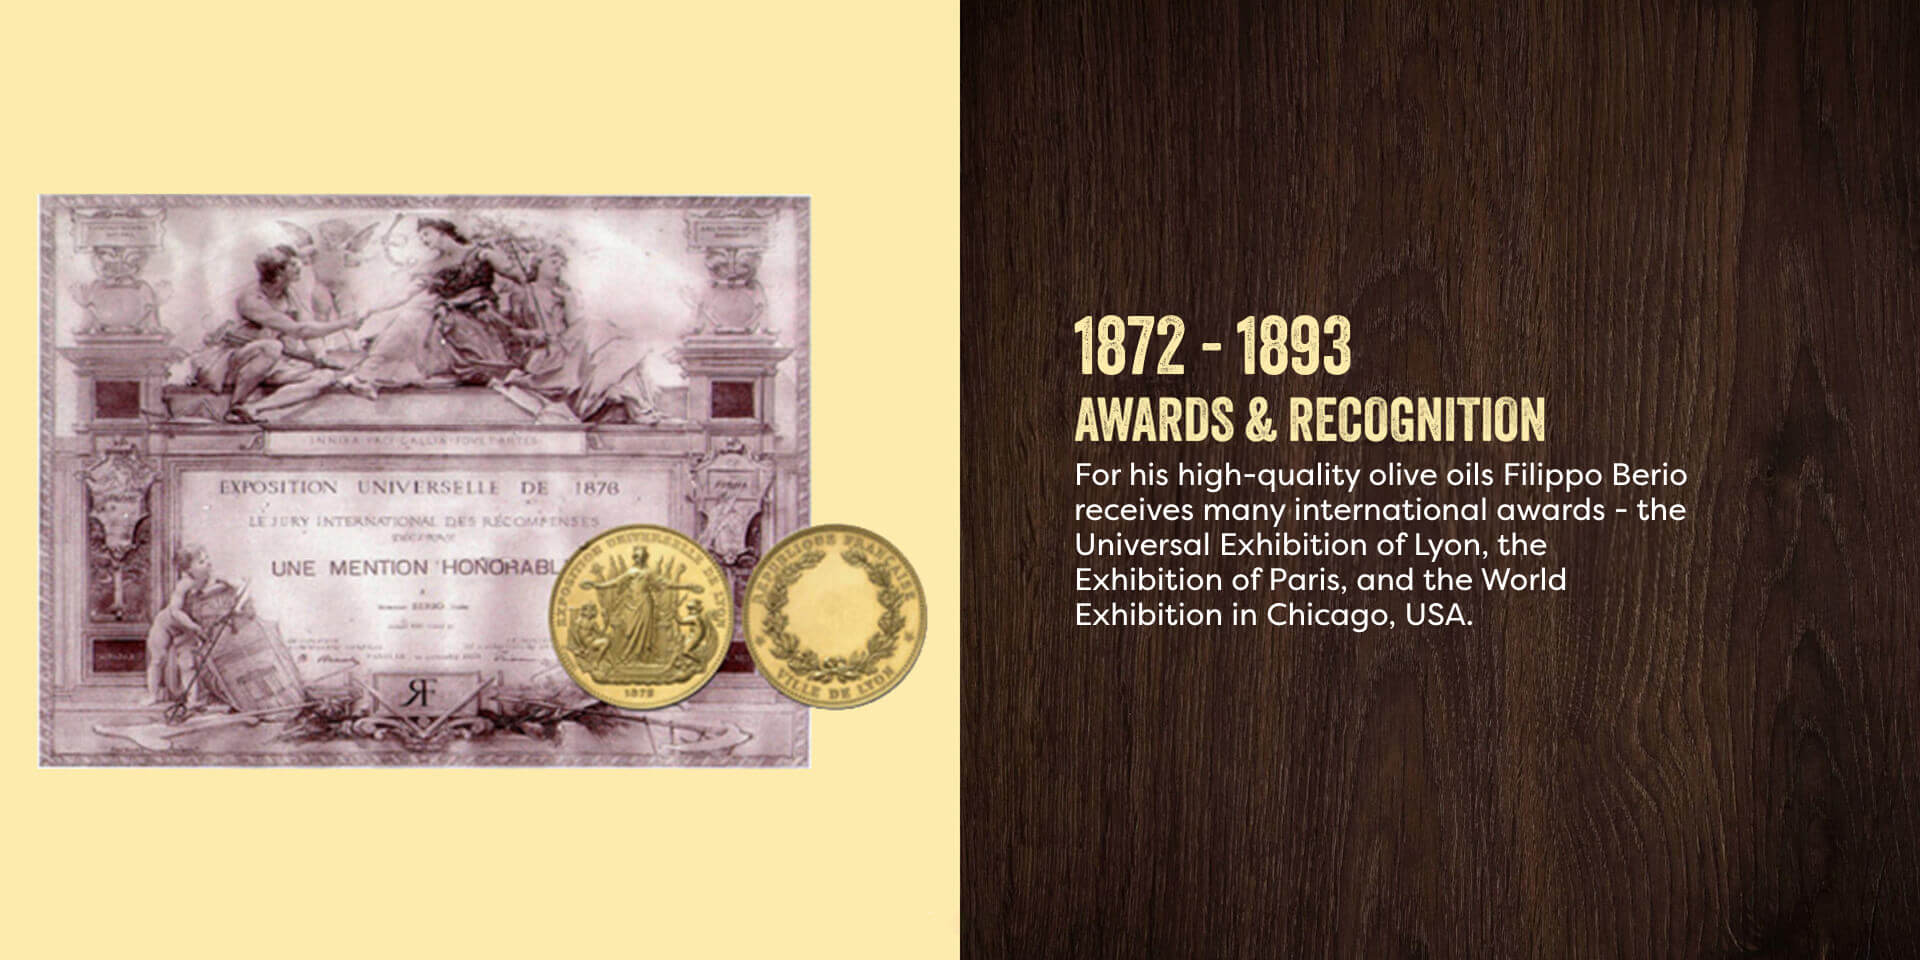 1872-1893 - Awards and recognition